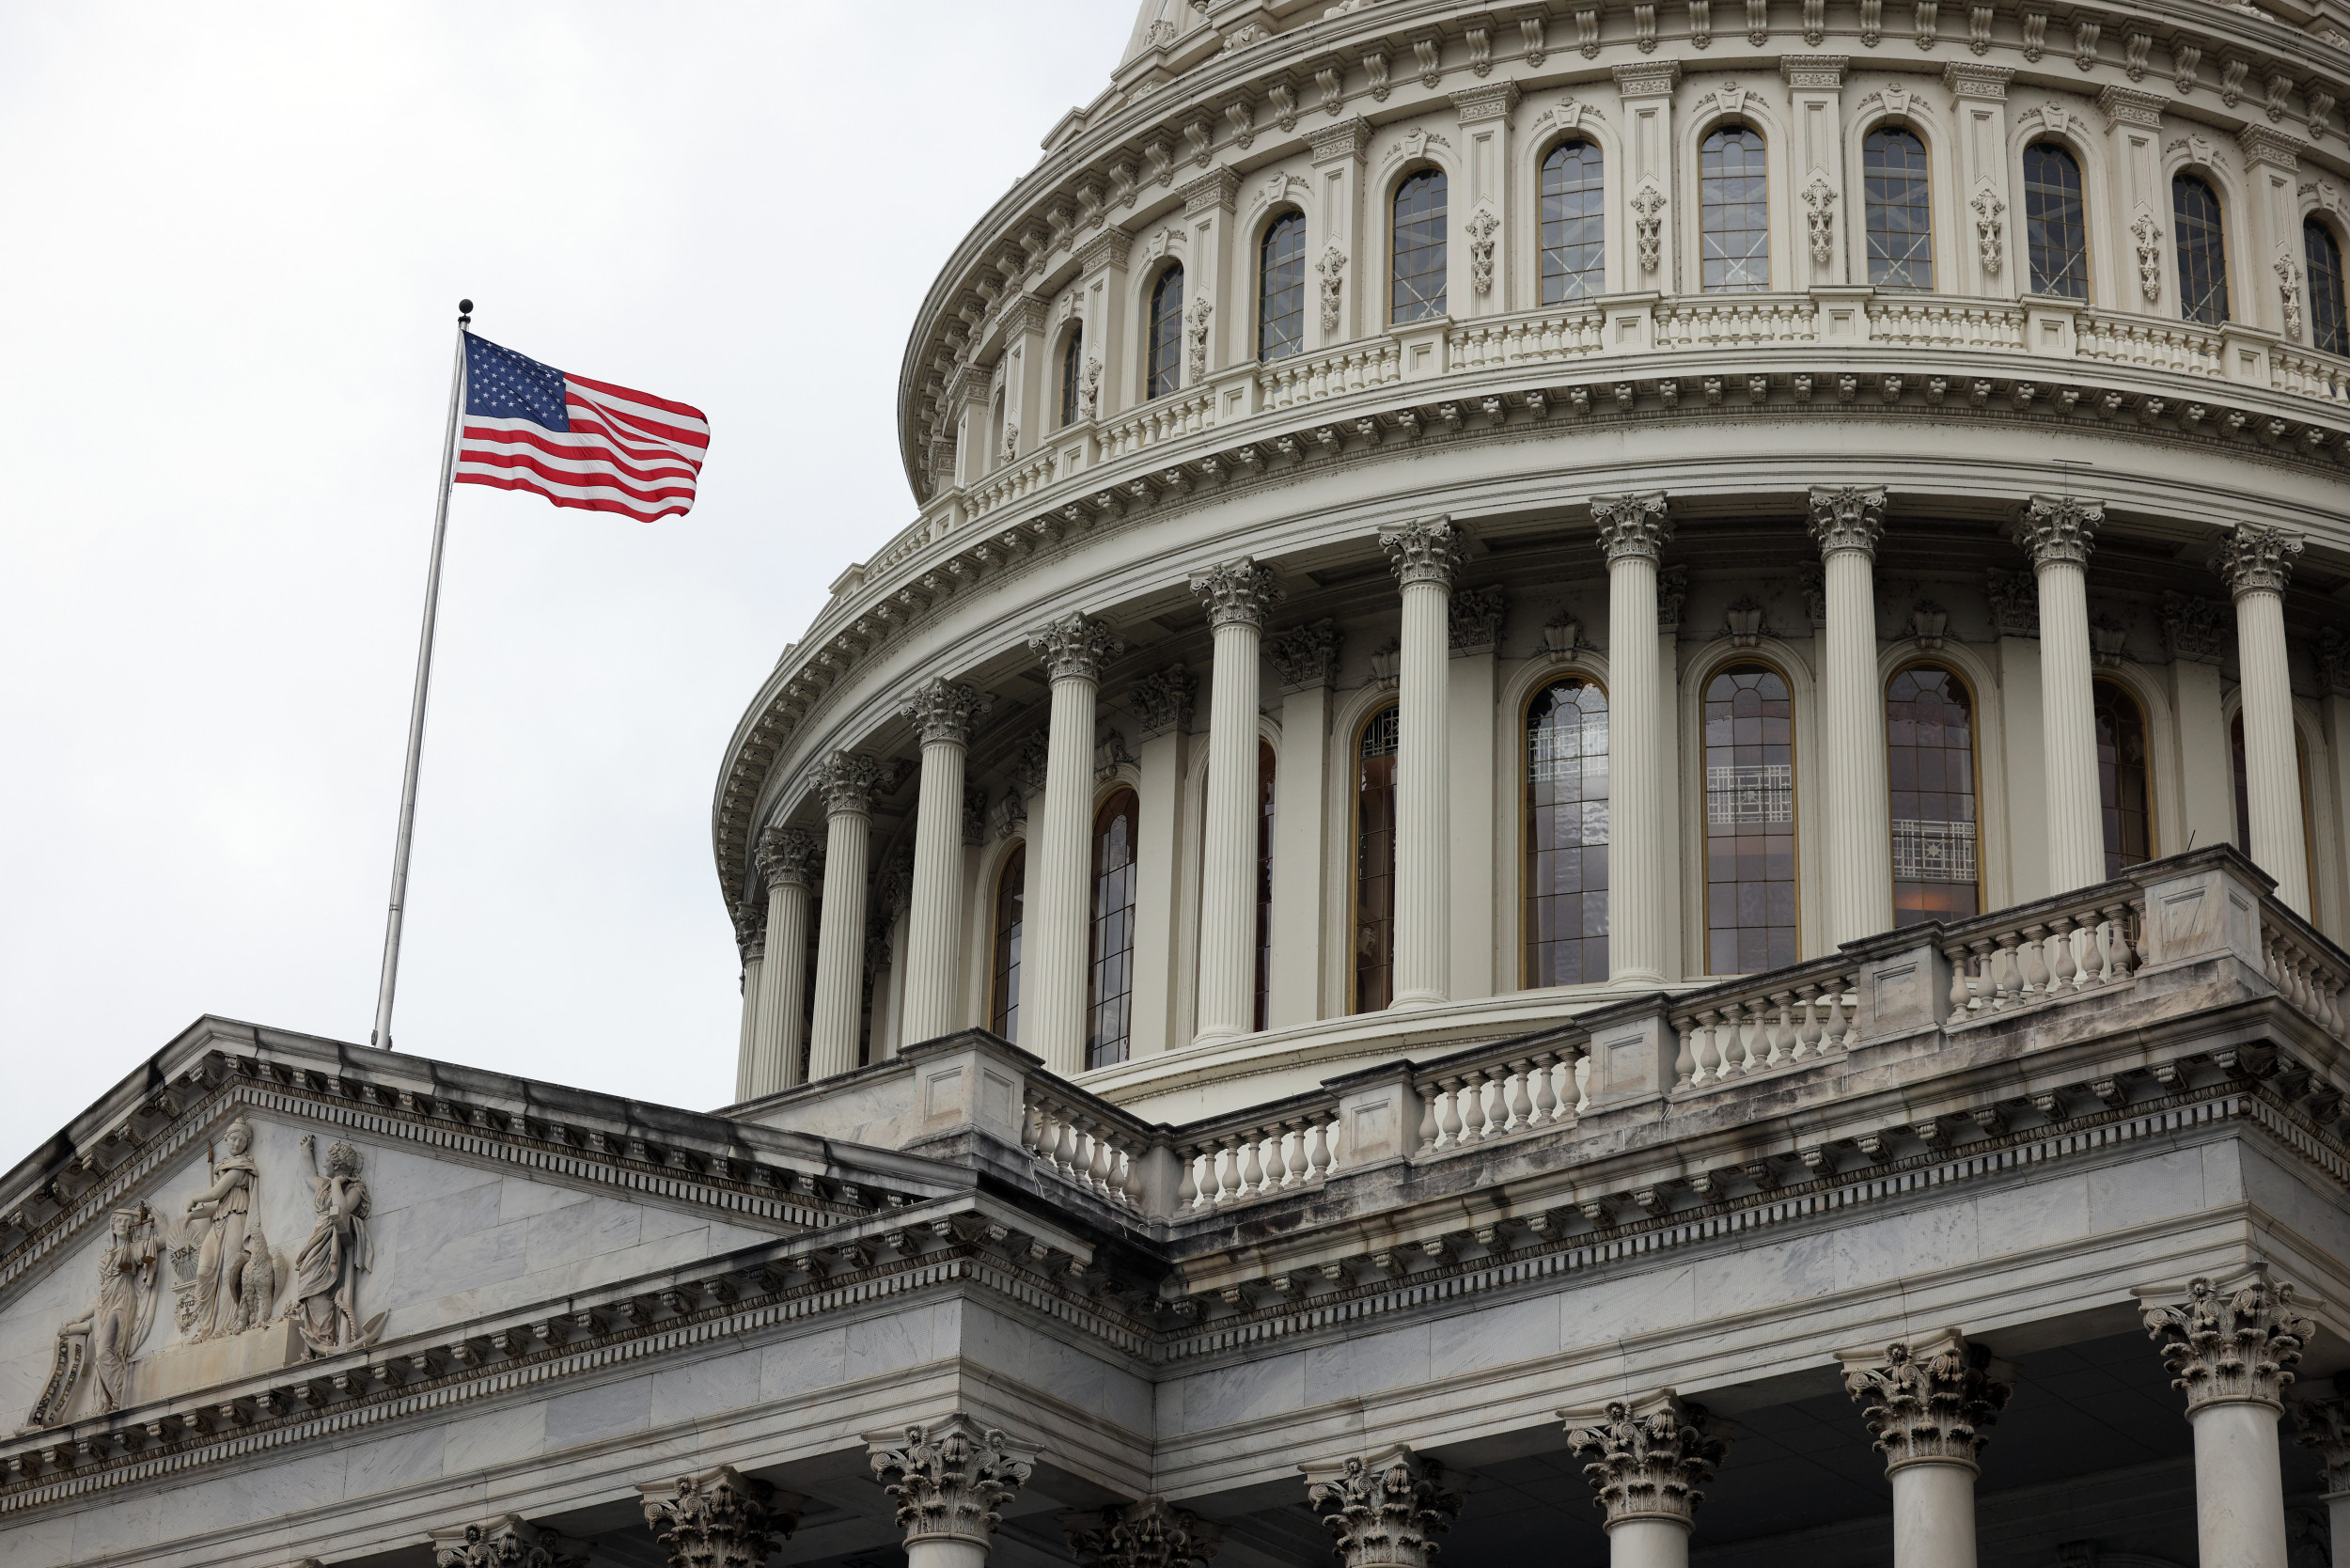 Will There Be a Government Shutdown? Congress Has 8 Days Until Deadline